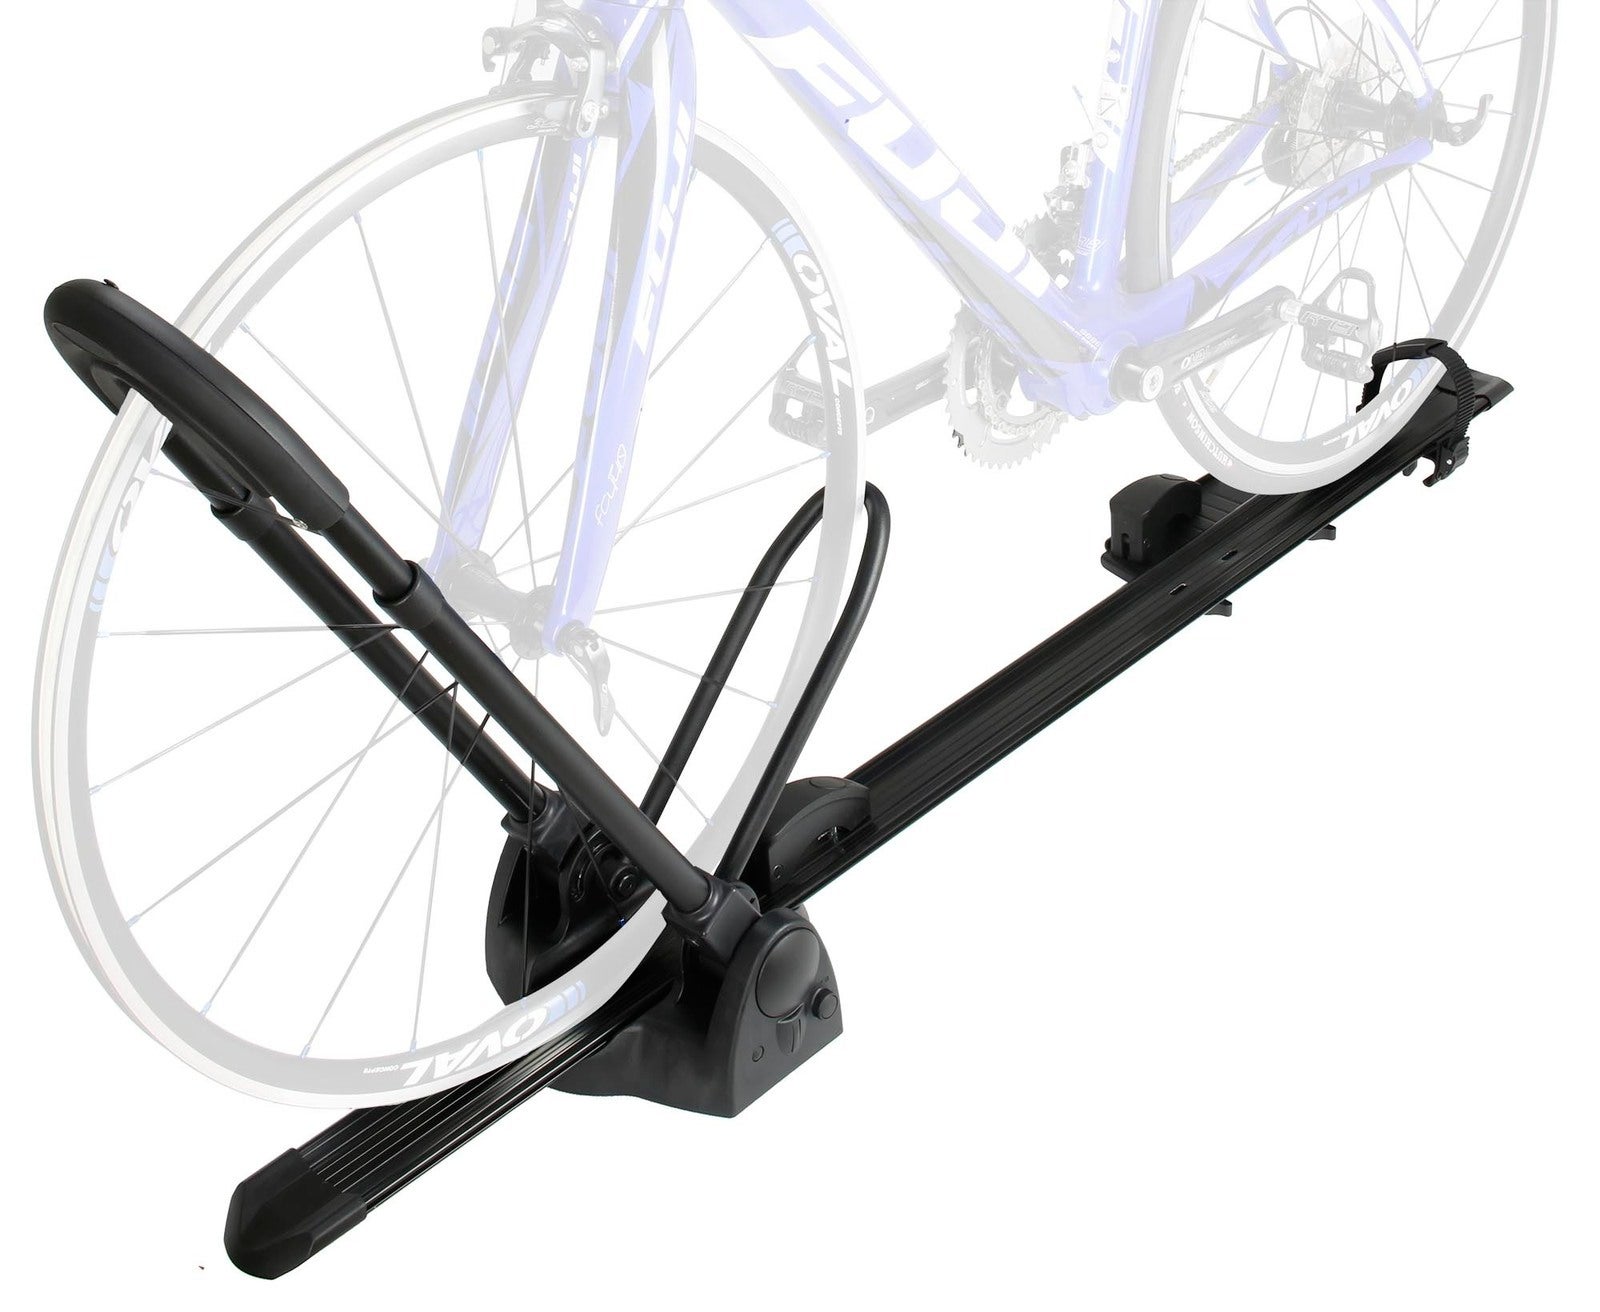 VENZO Car Roof Bike Bicycle Carrier Rack Clamp on Type Max 15kg